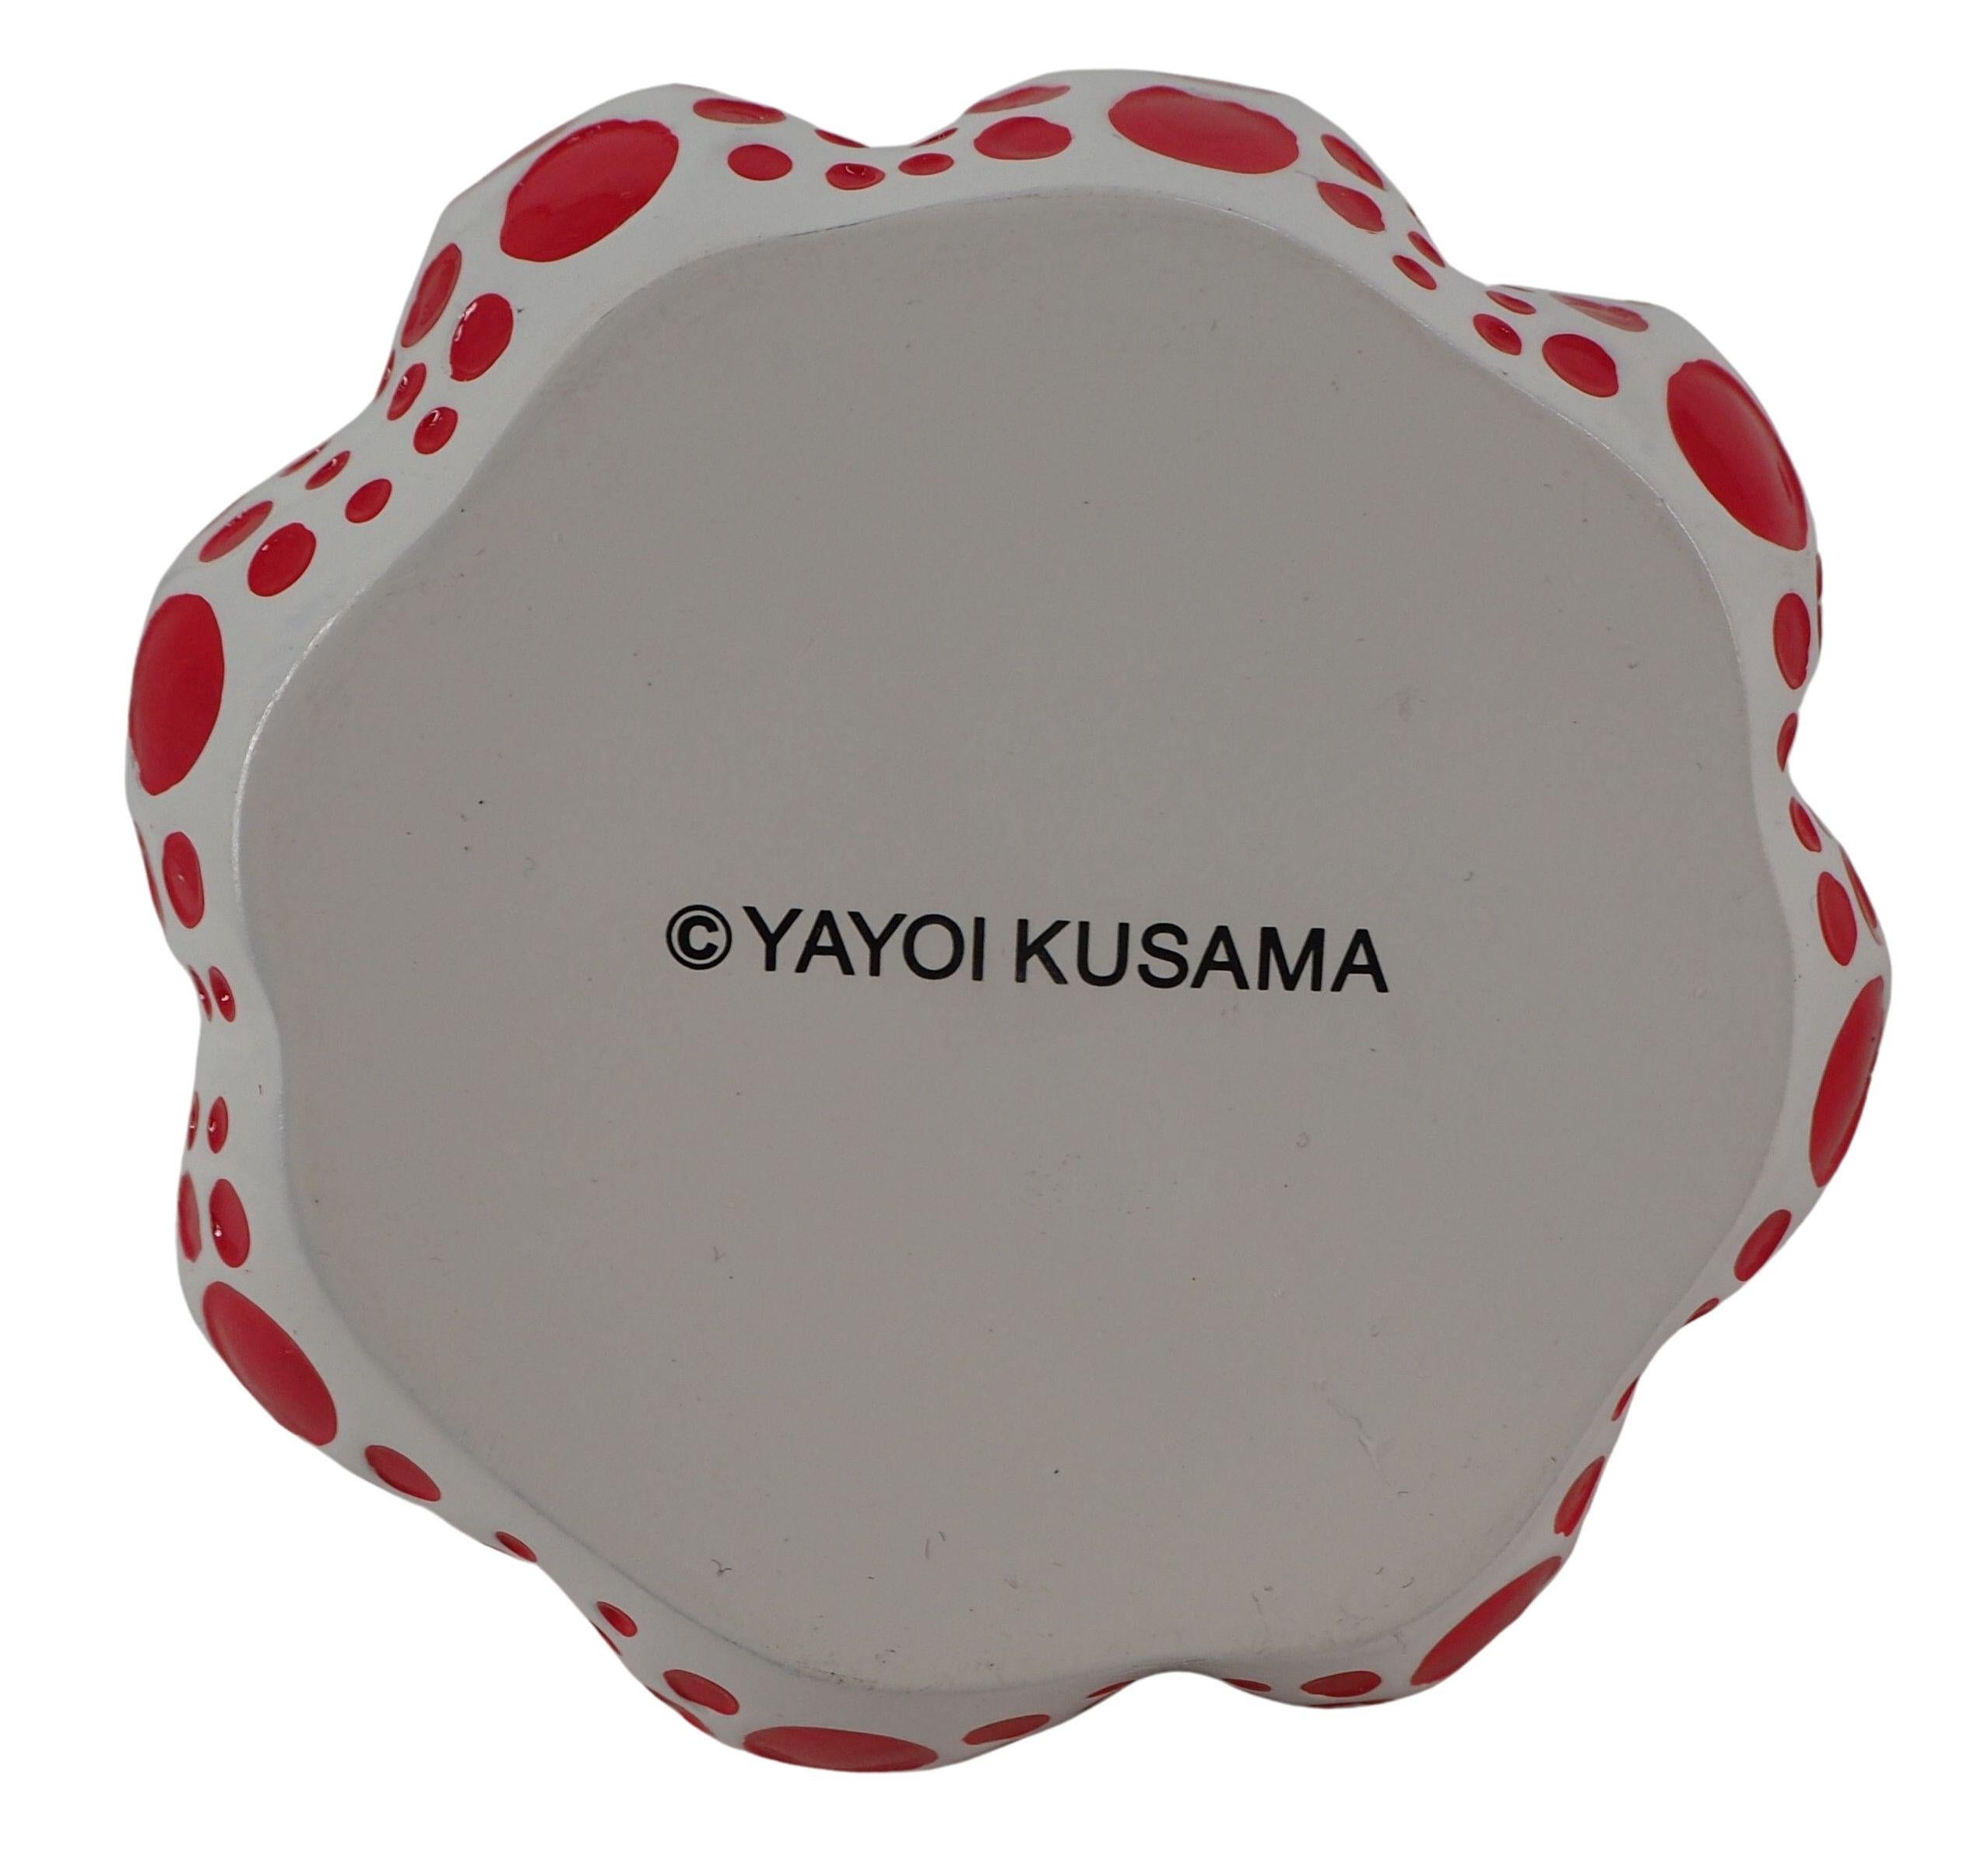 Yayoi Kusama
Pumpkin red (Dots Obsession Red)

A pumpkin sculpture made of resin
Signed under the base of the sculpture
Diameter: 8 cm
Height: 10.5 cm
Presented in the original editor case

Excellent condition